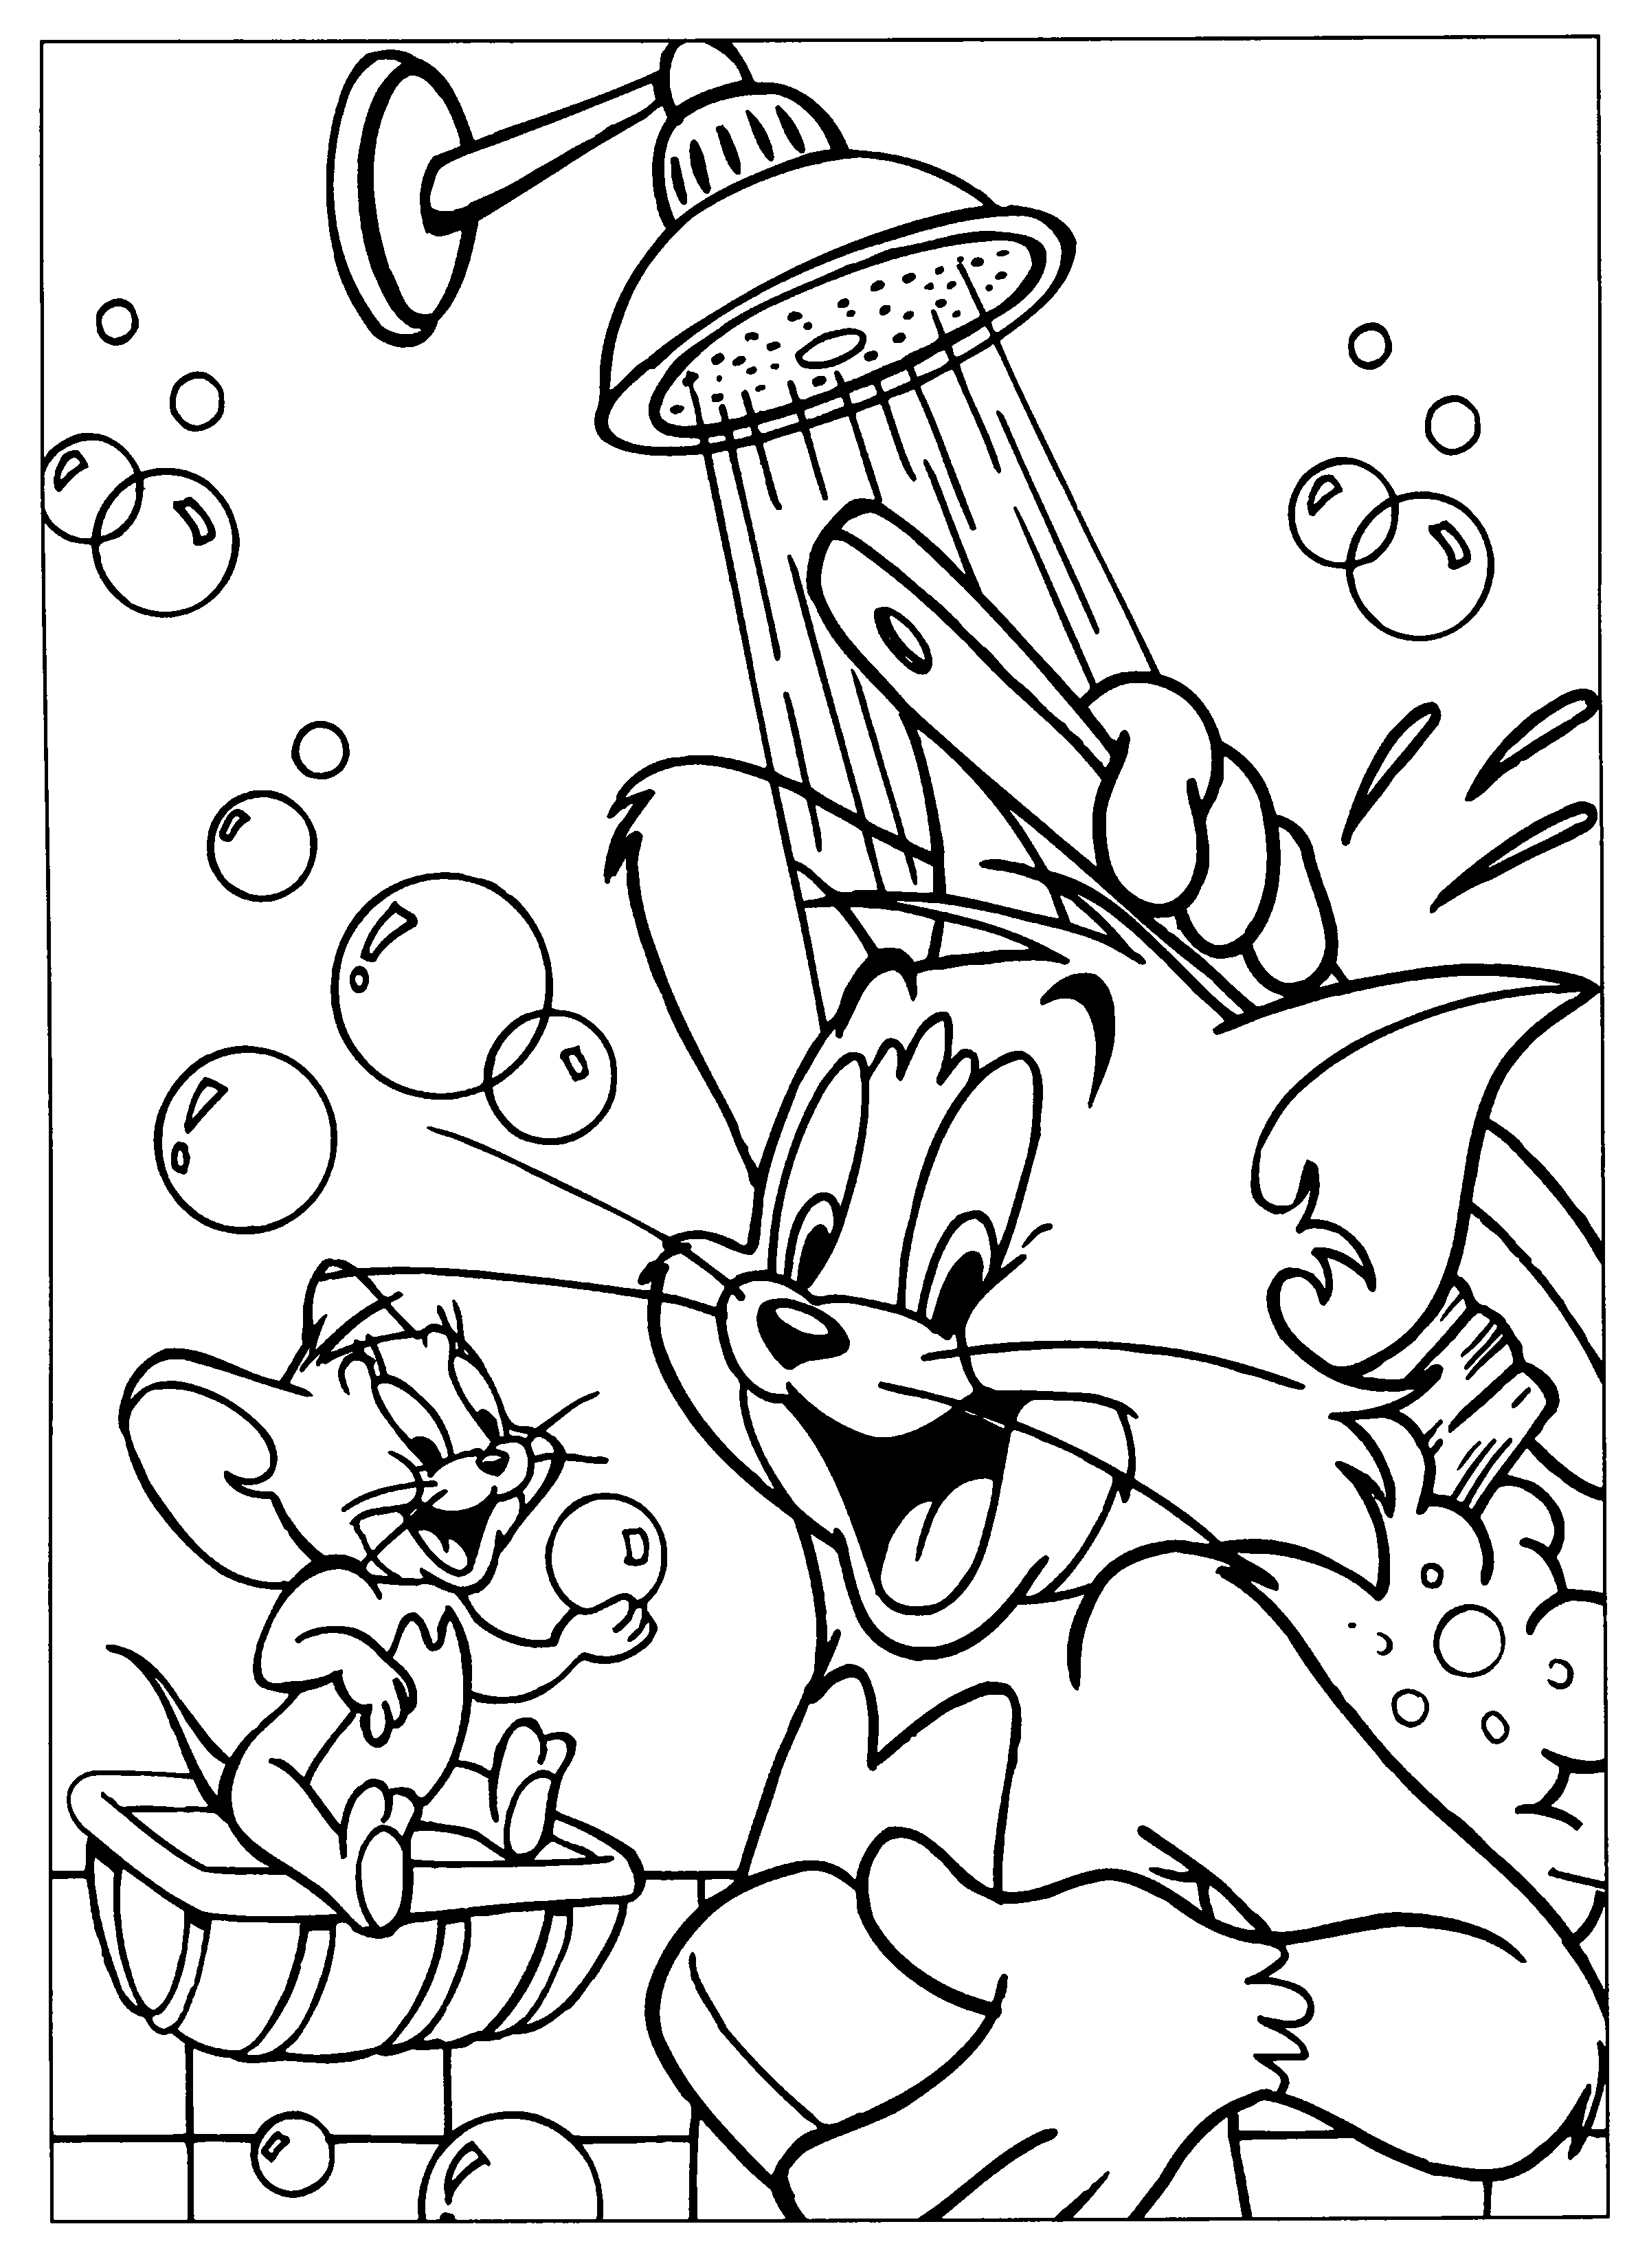 tom and jerry coloring page free printable tom and jerry coloring pages for kids jerry page and tom coloring 